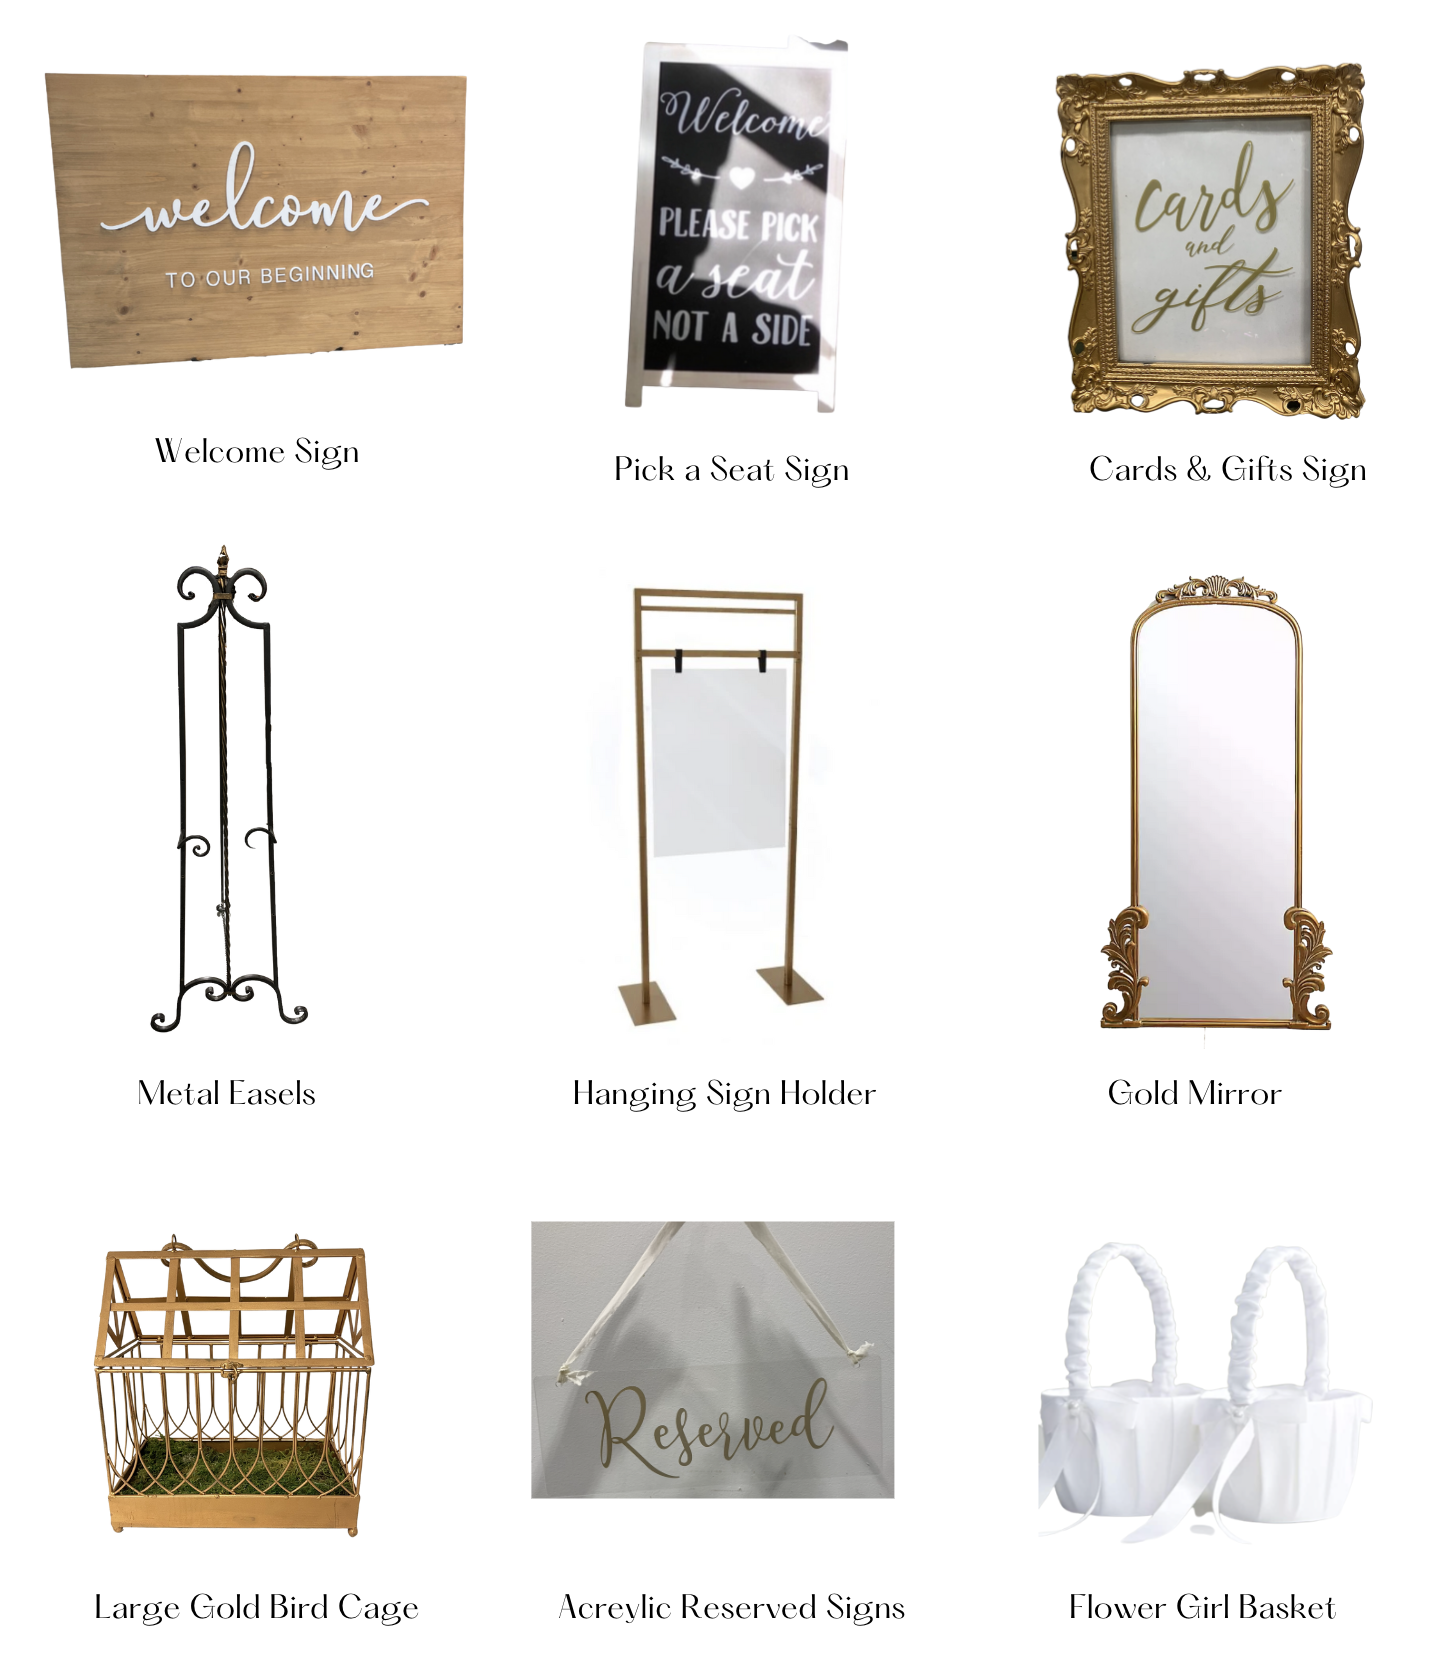 Bluegrass Chic Signs, drapes, bird cages, easels, flower girl baskets, uplights, fairy lights, small trees, hanging globes, gauze runners, street lamps